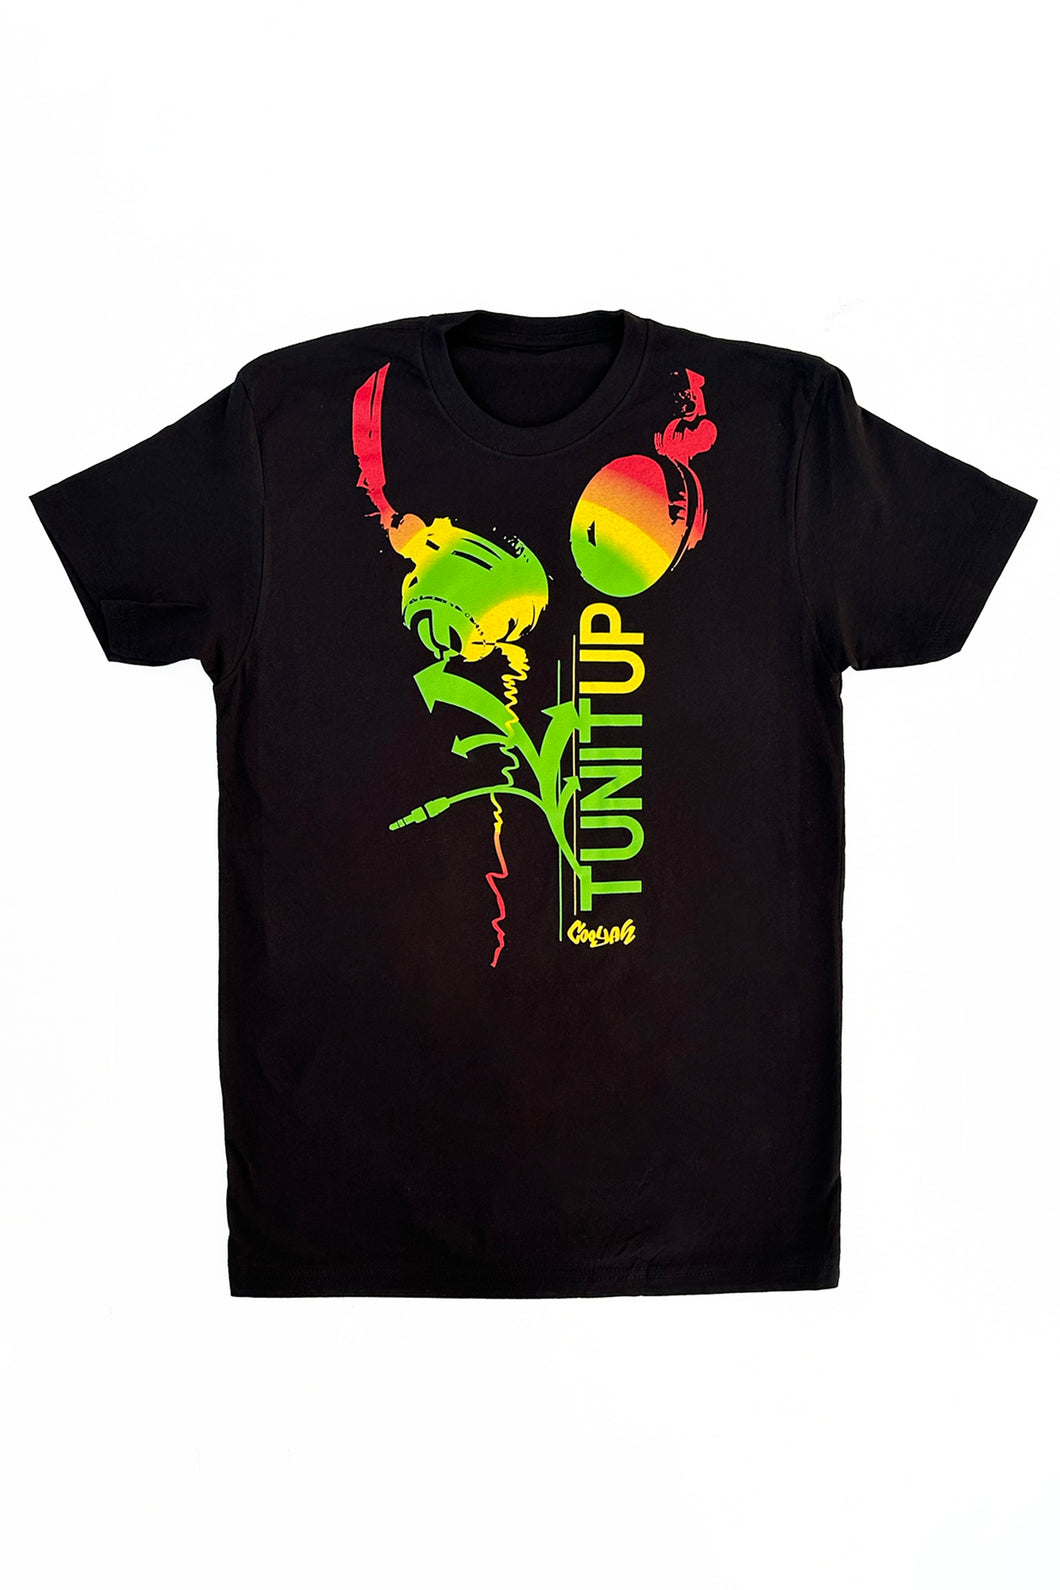 Cooyah Jamaica.  Men's Tun It Up Rasta tee.  Featuring a design with headphones screen printed in reggae colors.   Short sleeve, ringspun cotton.  Jamaican streetwear clothing since 1987.  